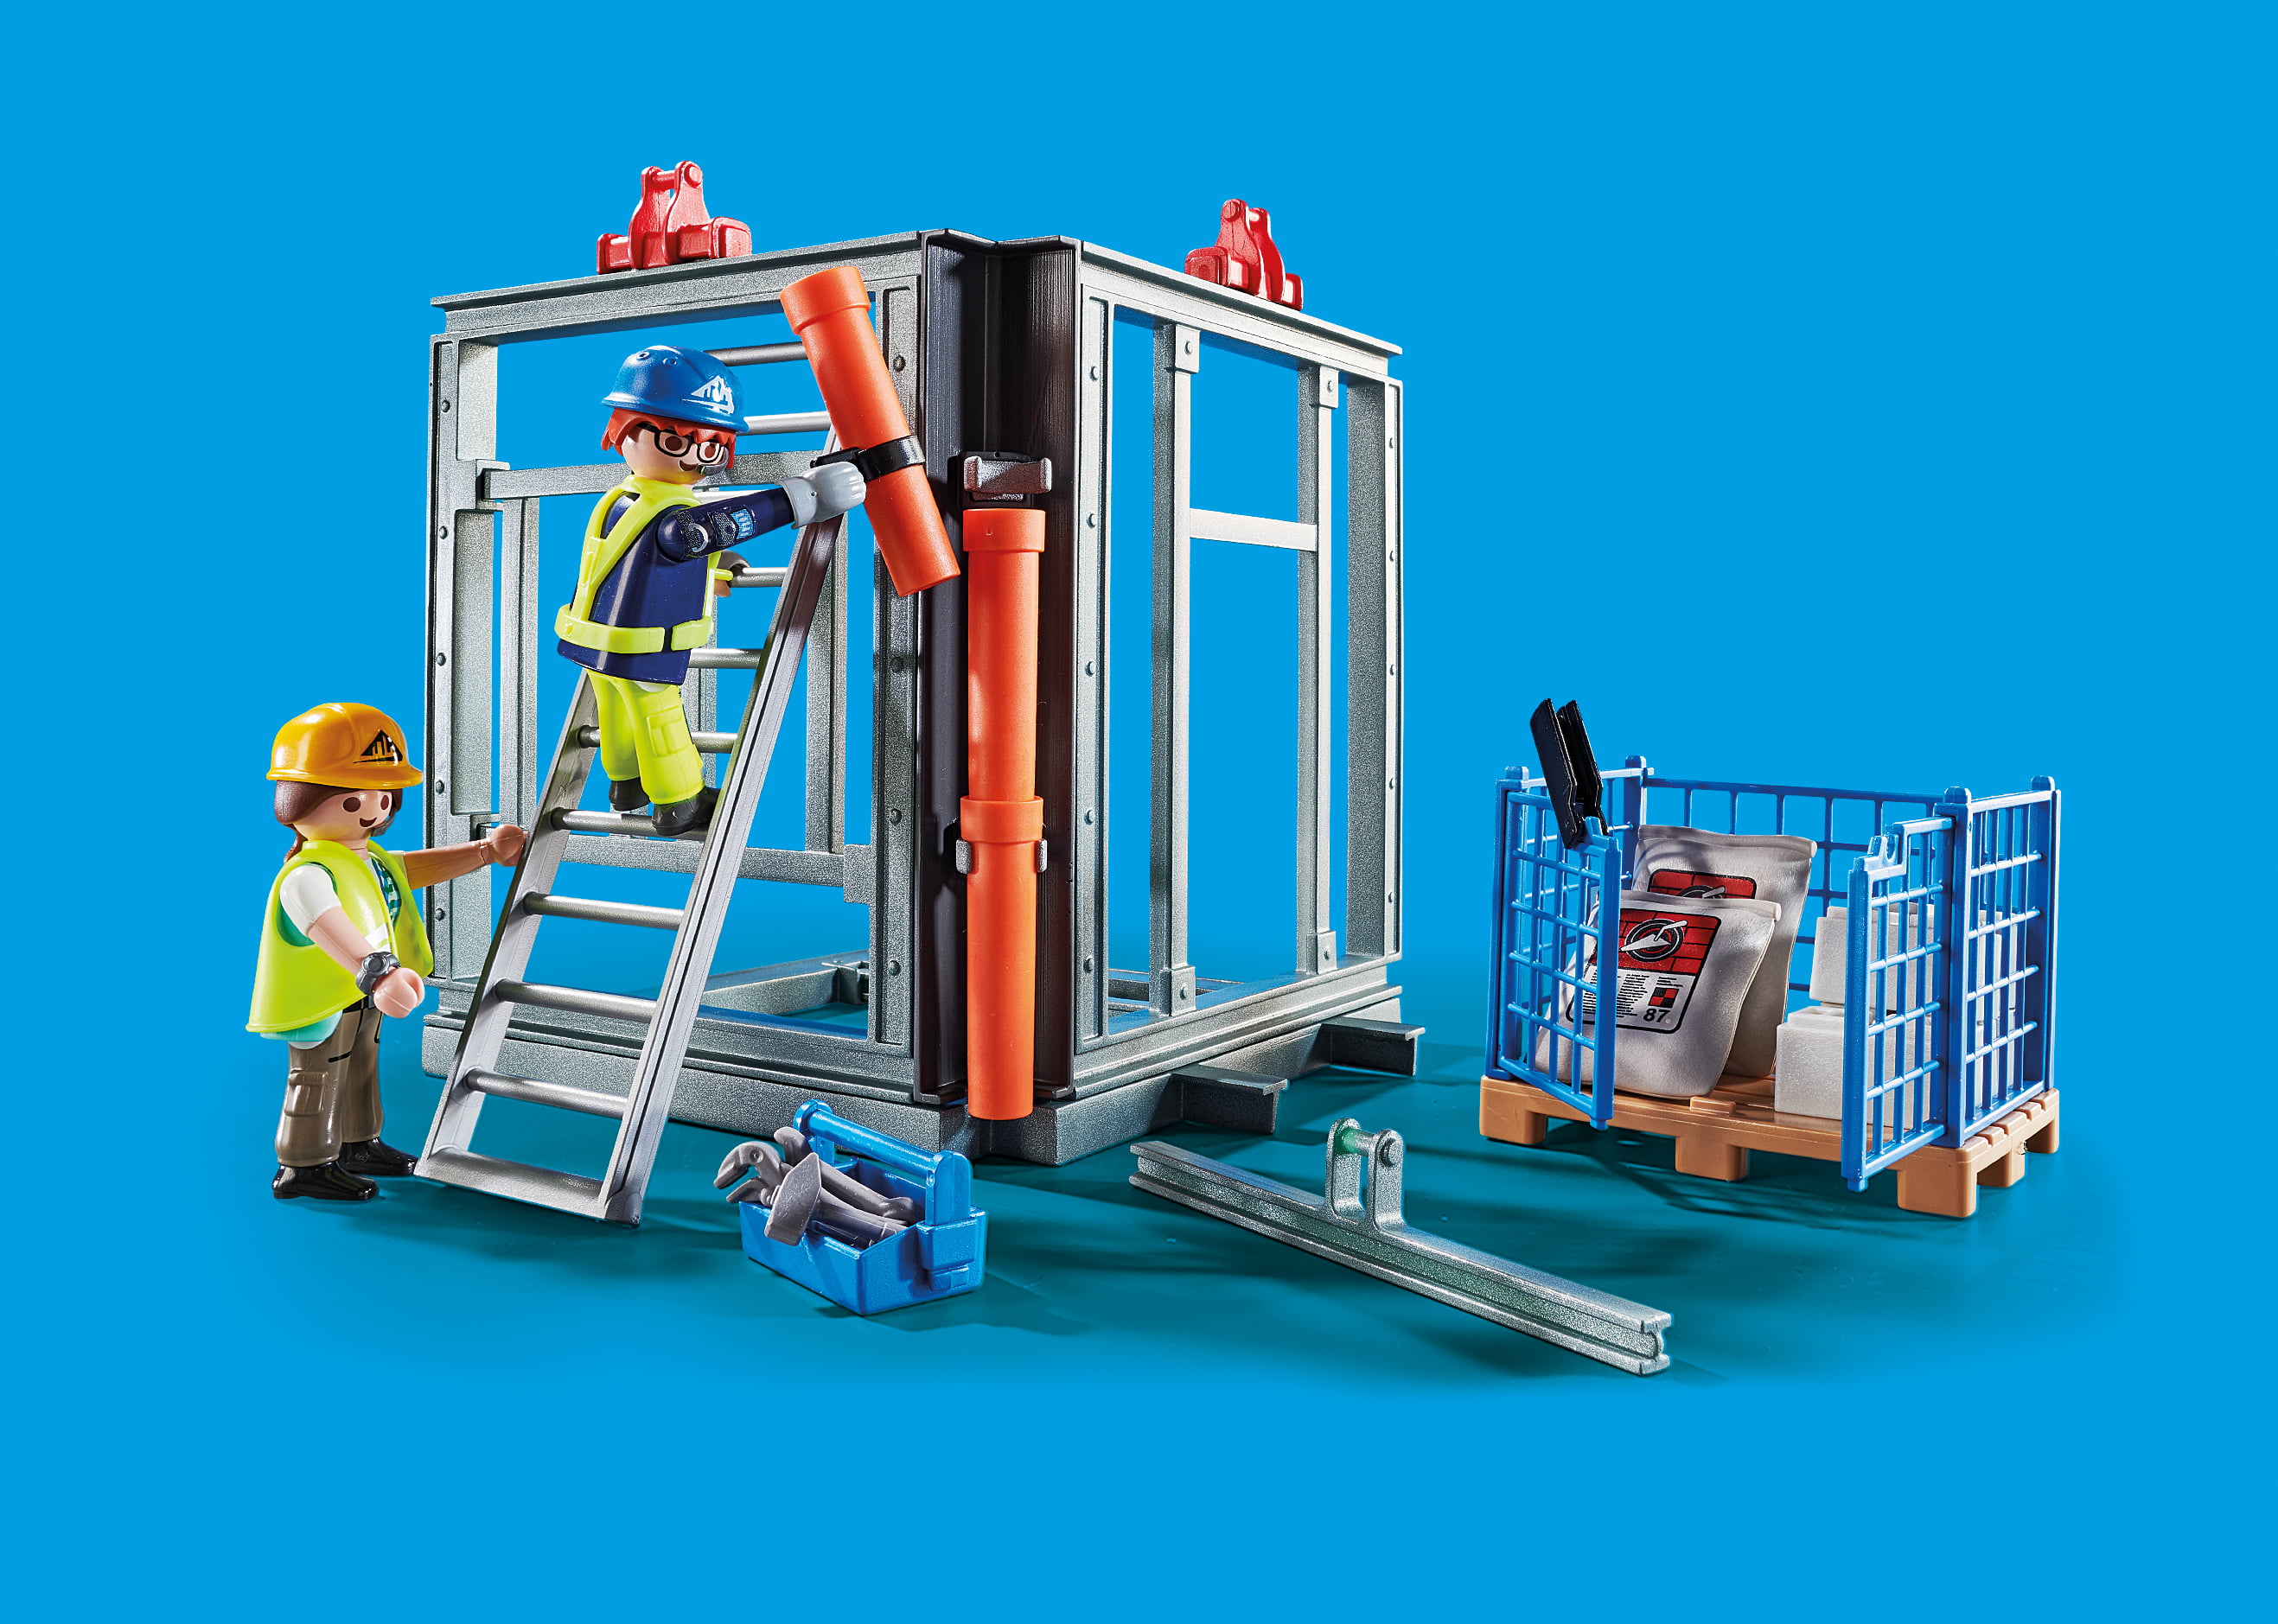 PLAYMOBIL 70441 City Action Construction Crane With Remote Control for sale online